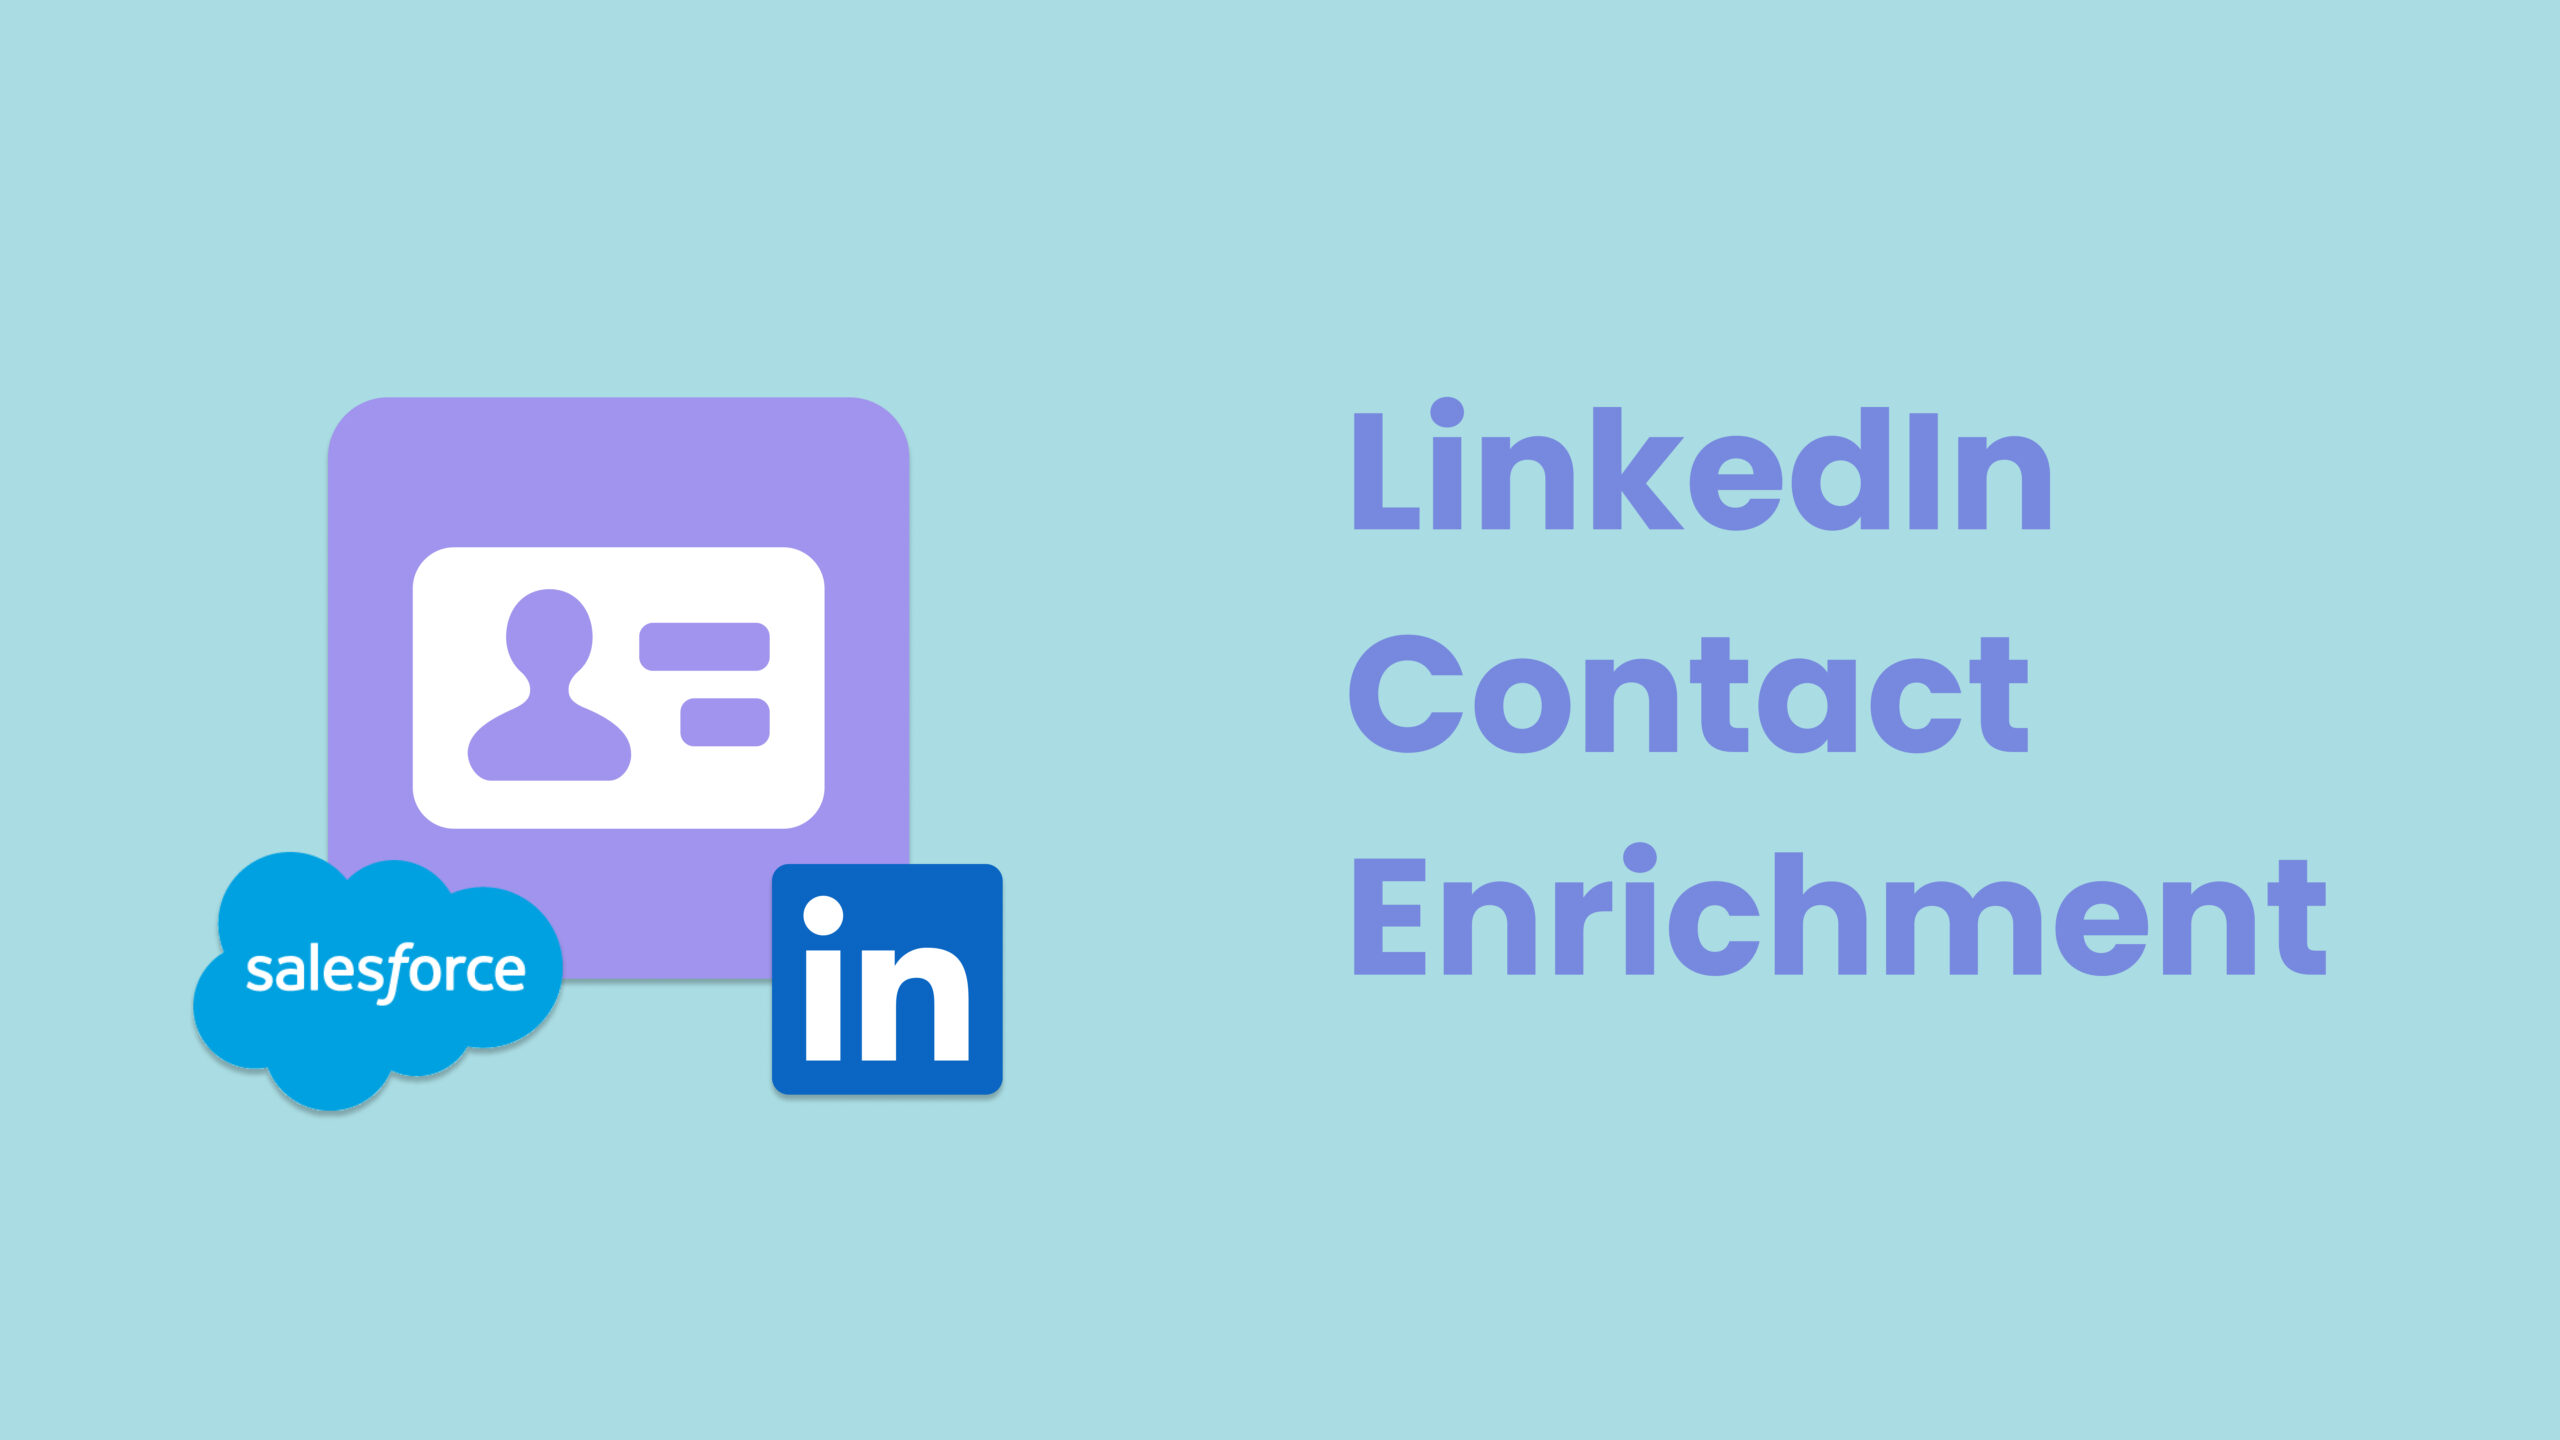 Delpha can enrich Salesforce Contacts with data from LinkedIn.